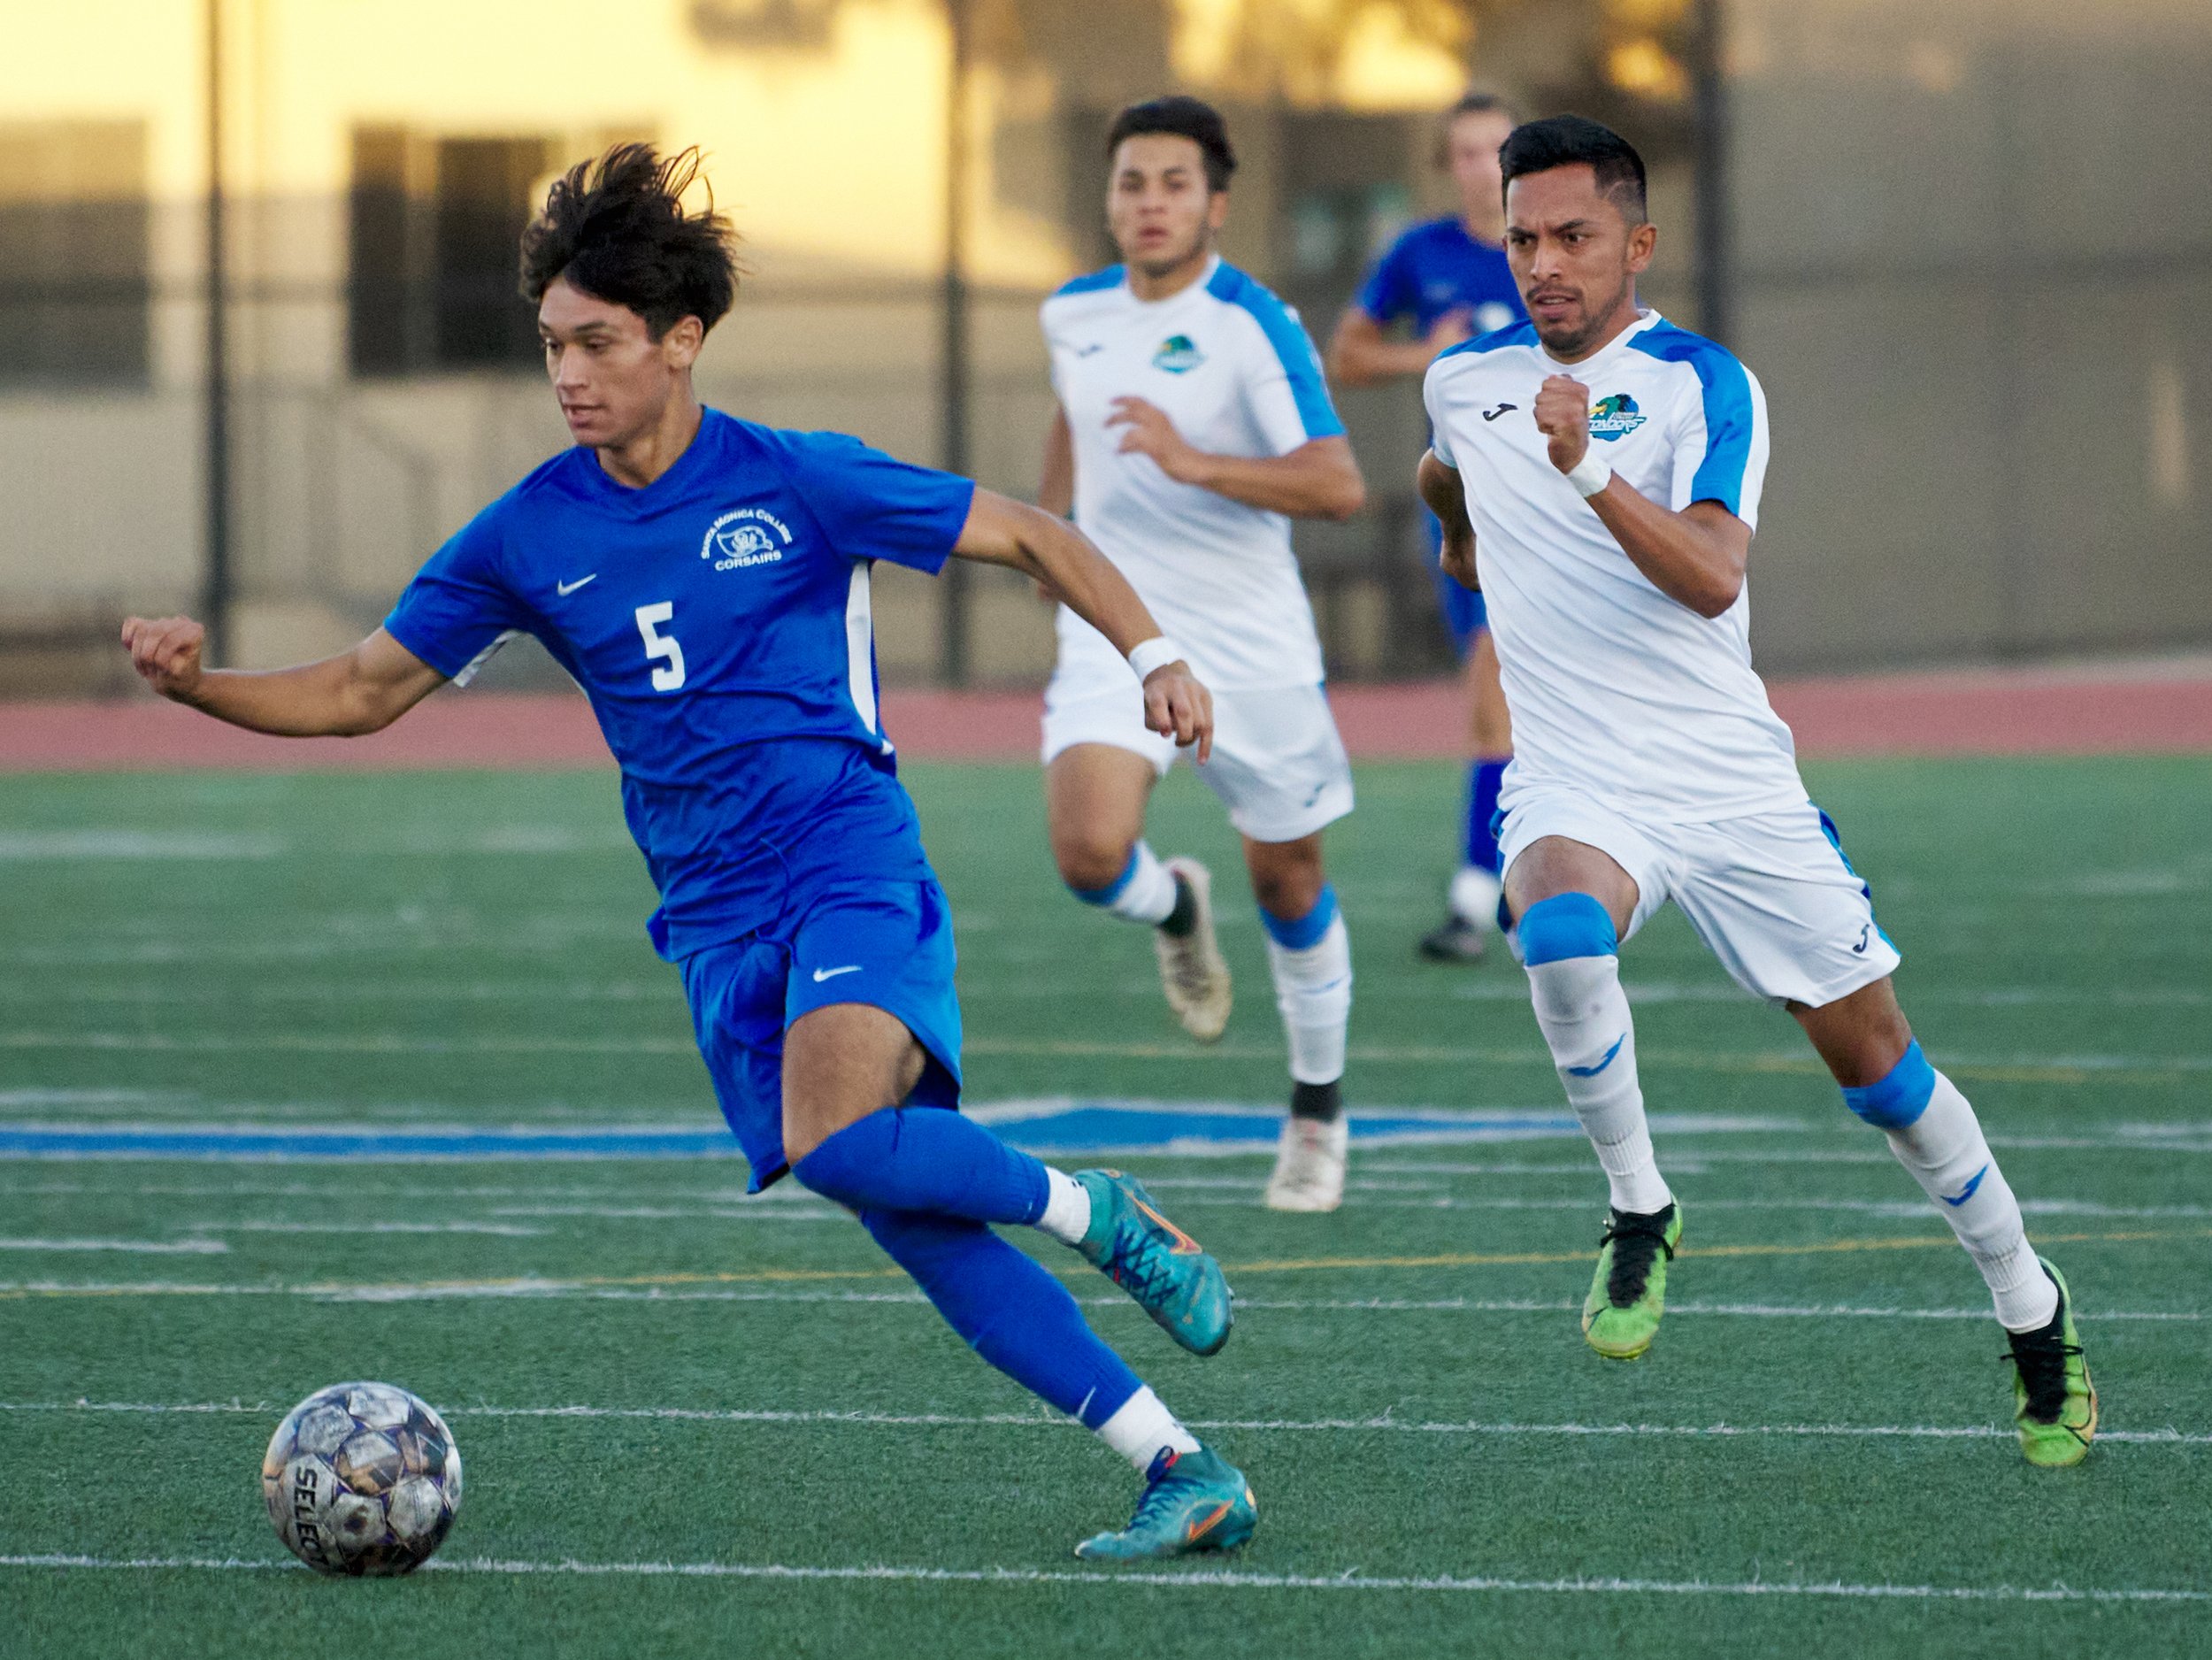  Santa Monica College Corsairs' Jose Urdiano and Oxnard College Condors' Alfonso Lopez during the men's soccer match on Tuesday, Oct. 18, 2022, at Corsair Field in Santa Monica, Calif. The Corsairs lost 0-3. (Nicholas McCall | The Corsair) 